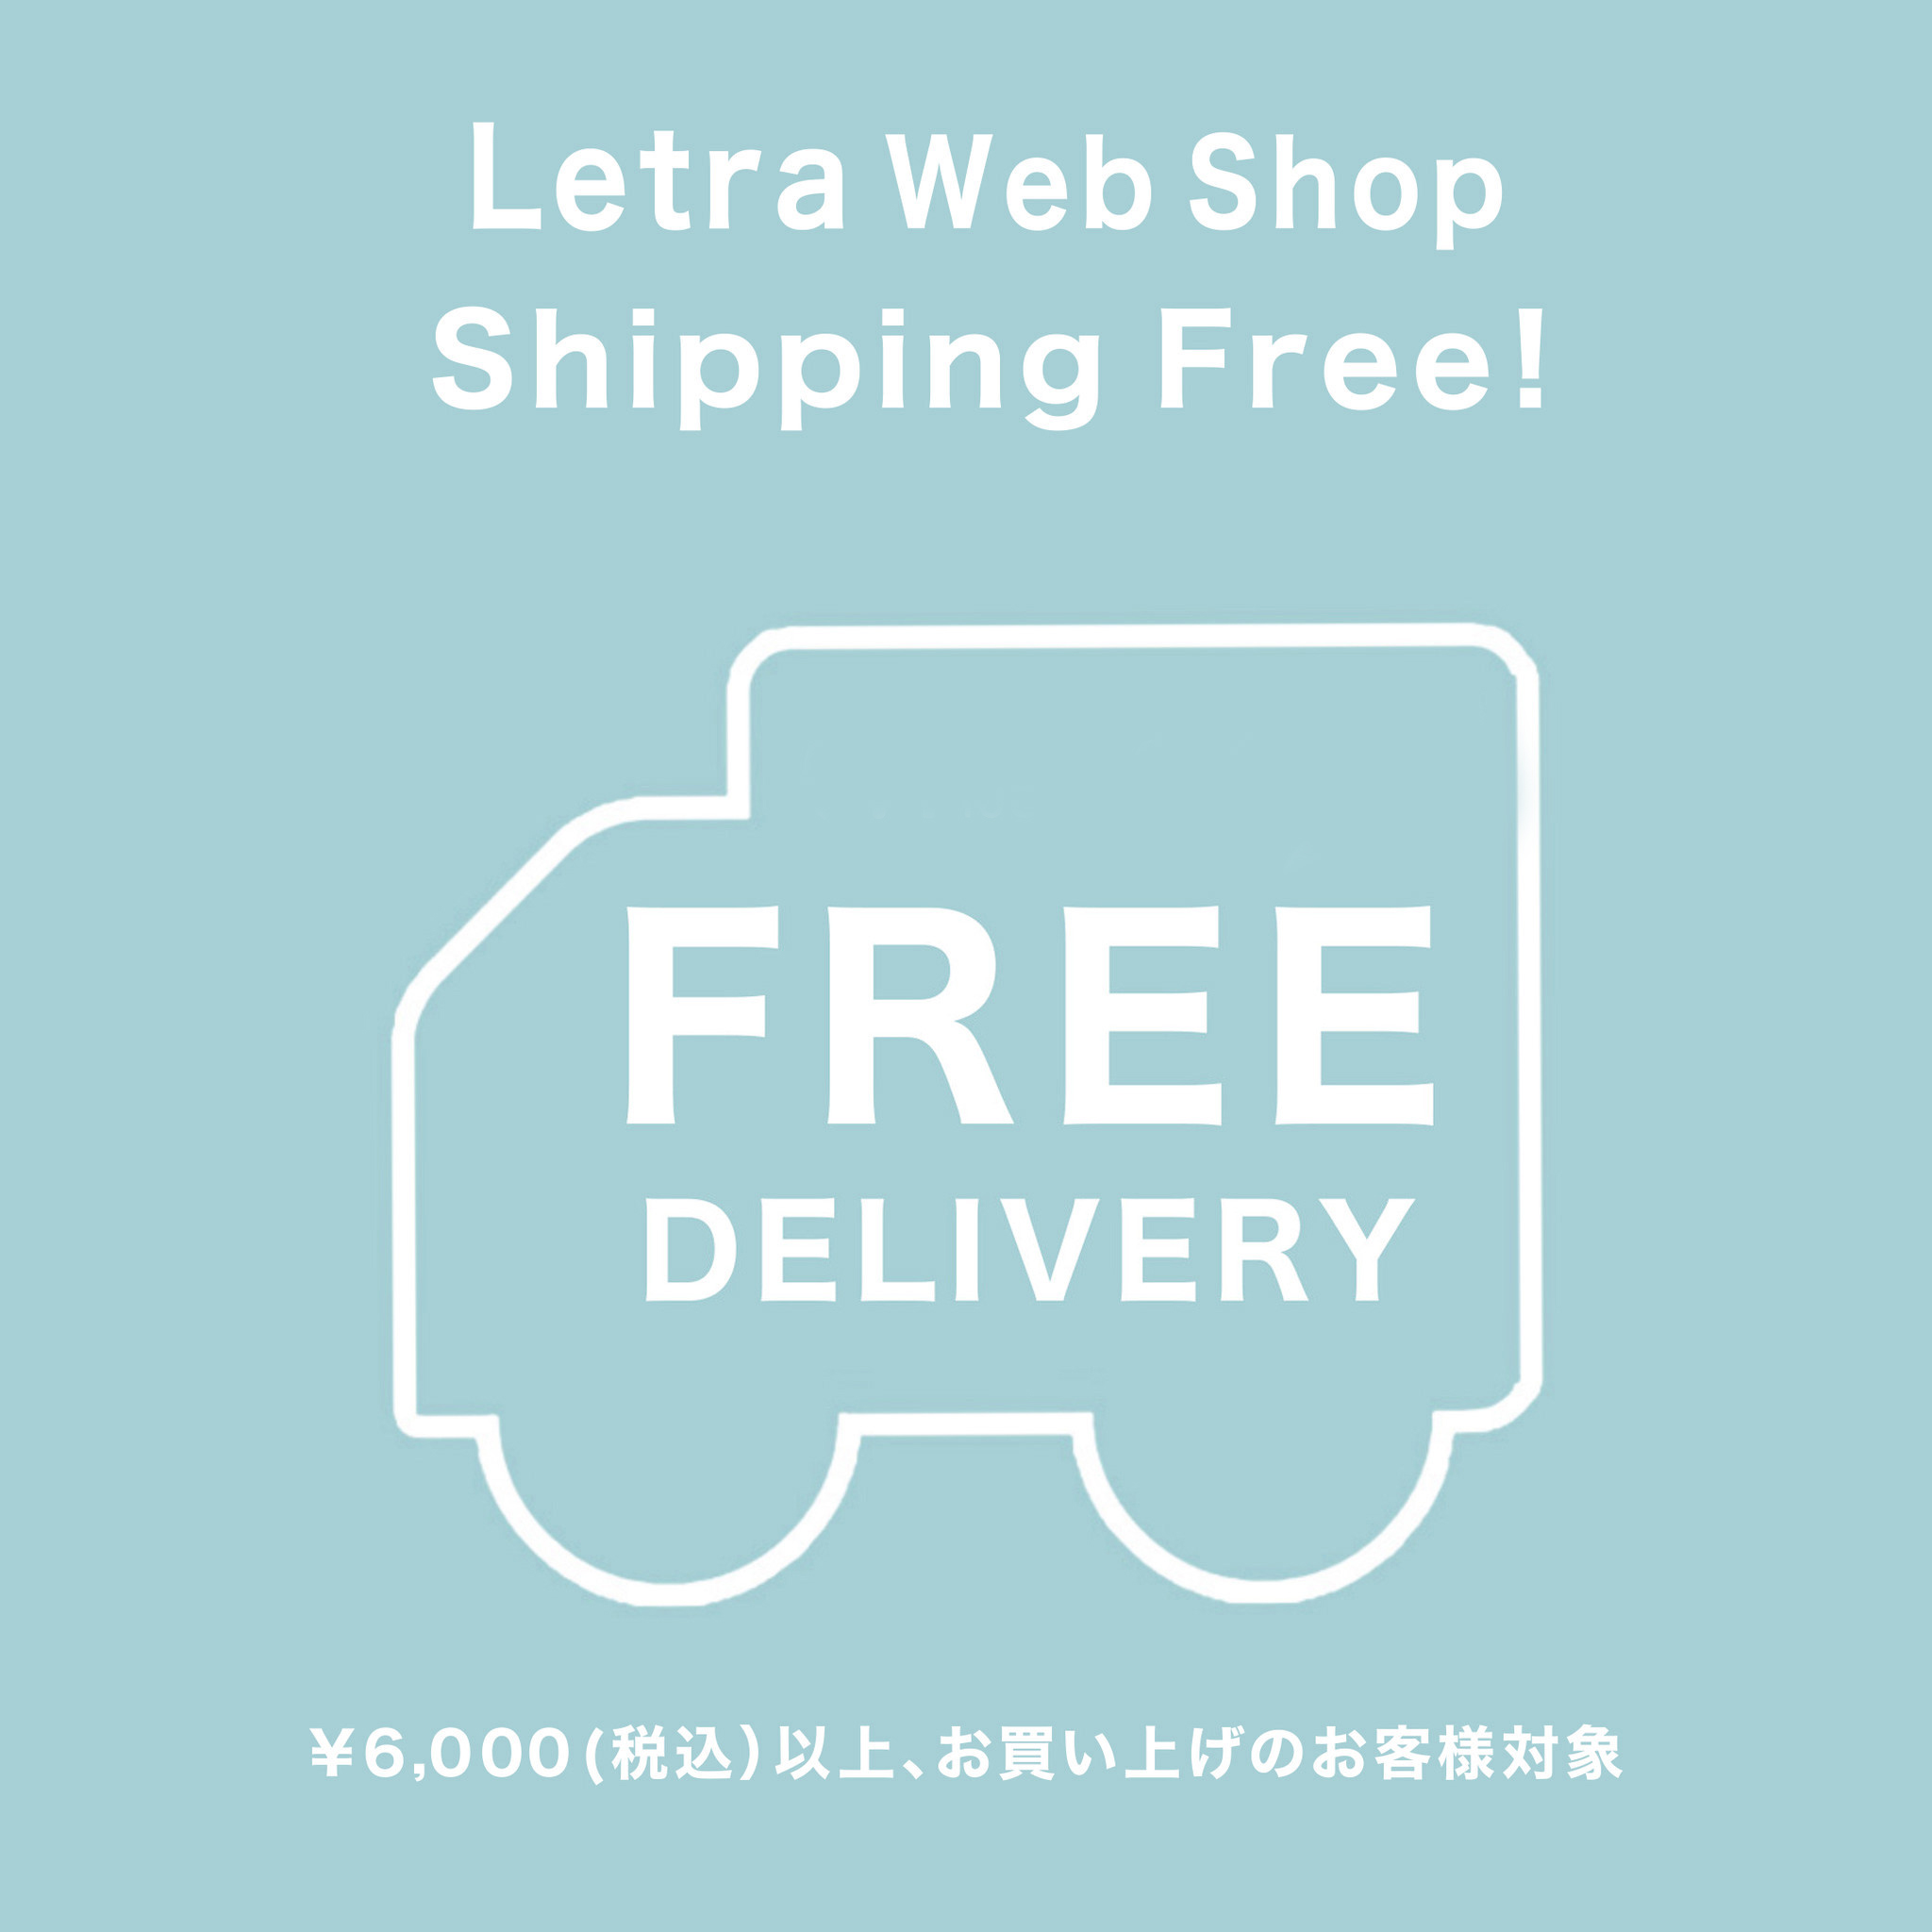 FREE DELIVERY～送料無料キャンペーン延長！